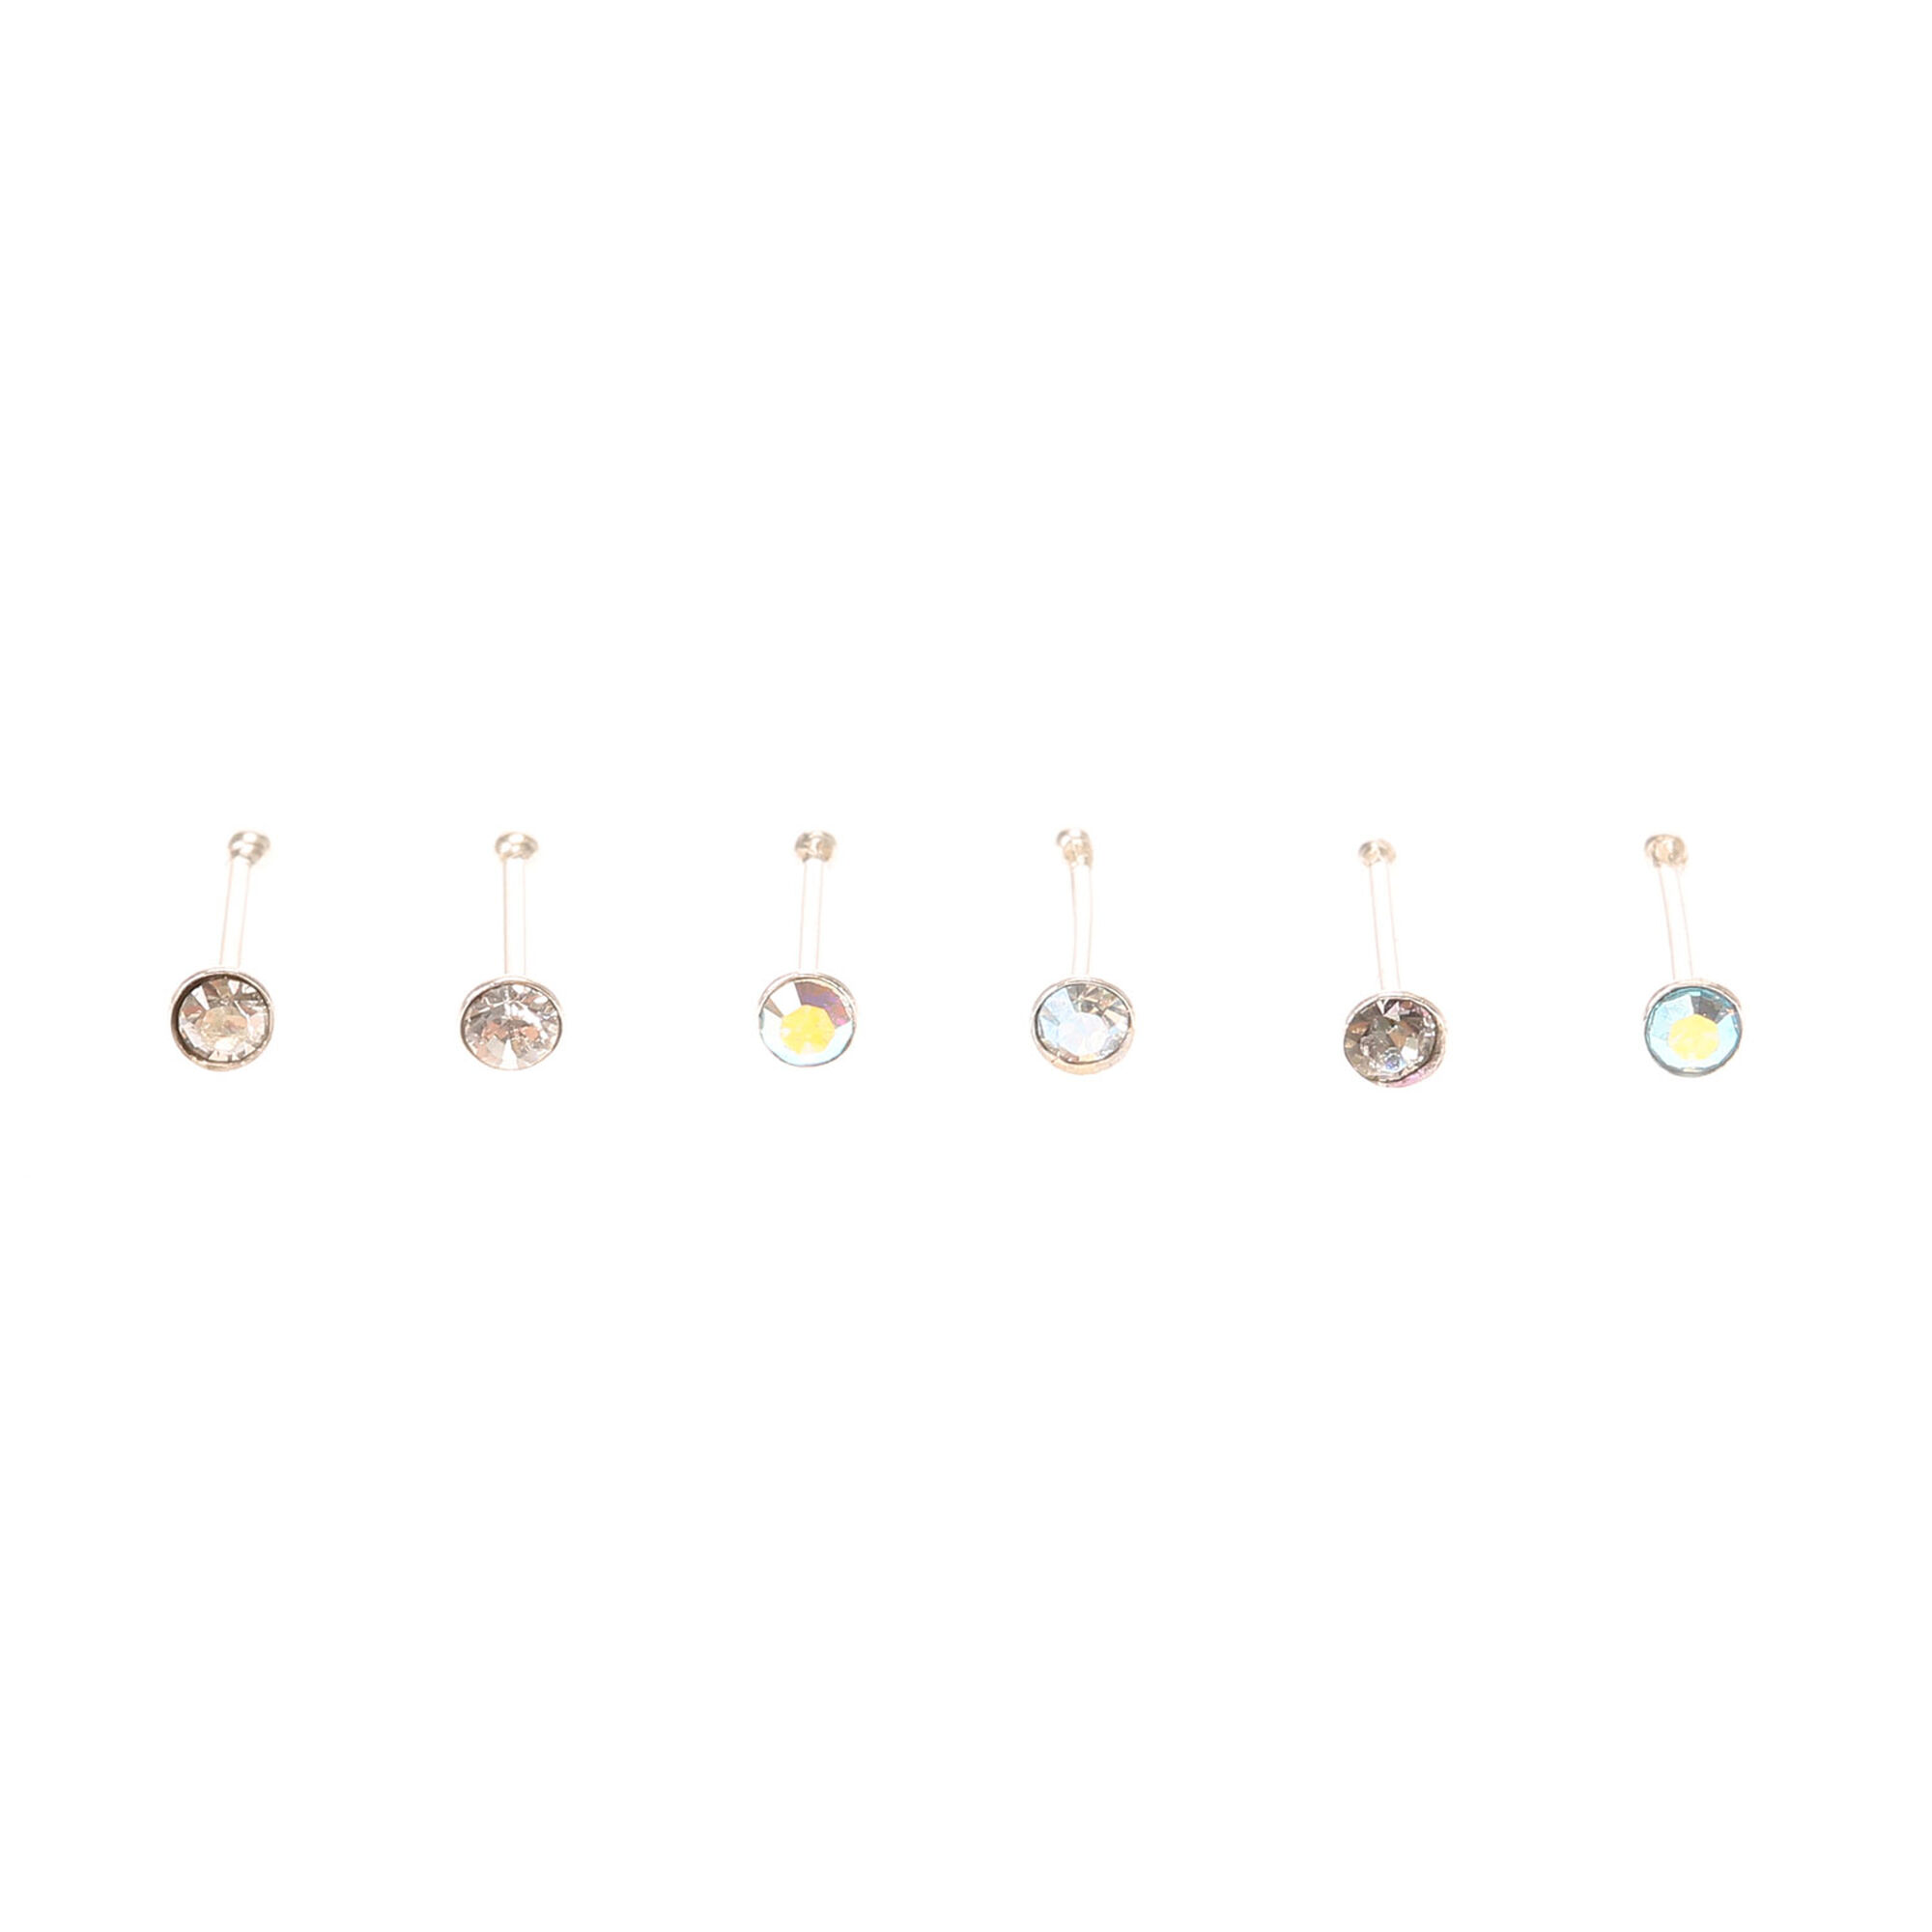 View Claires 22G Mixed Crystal Nose Studs Clear 6 Pack information